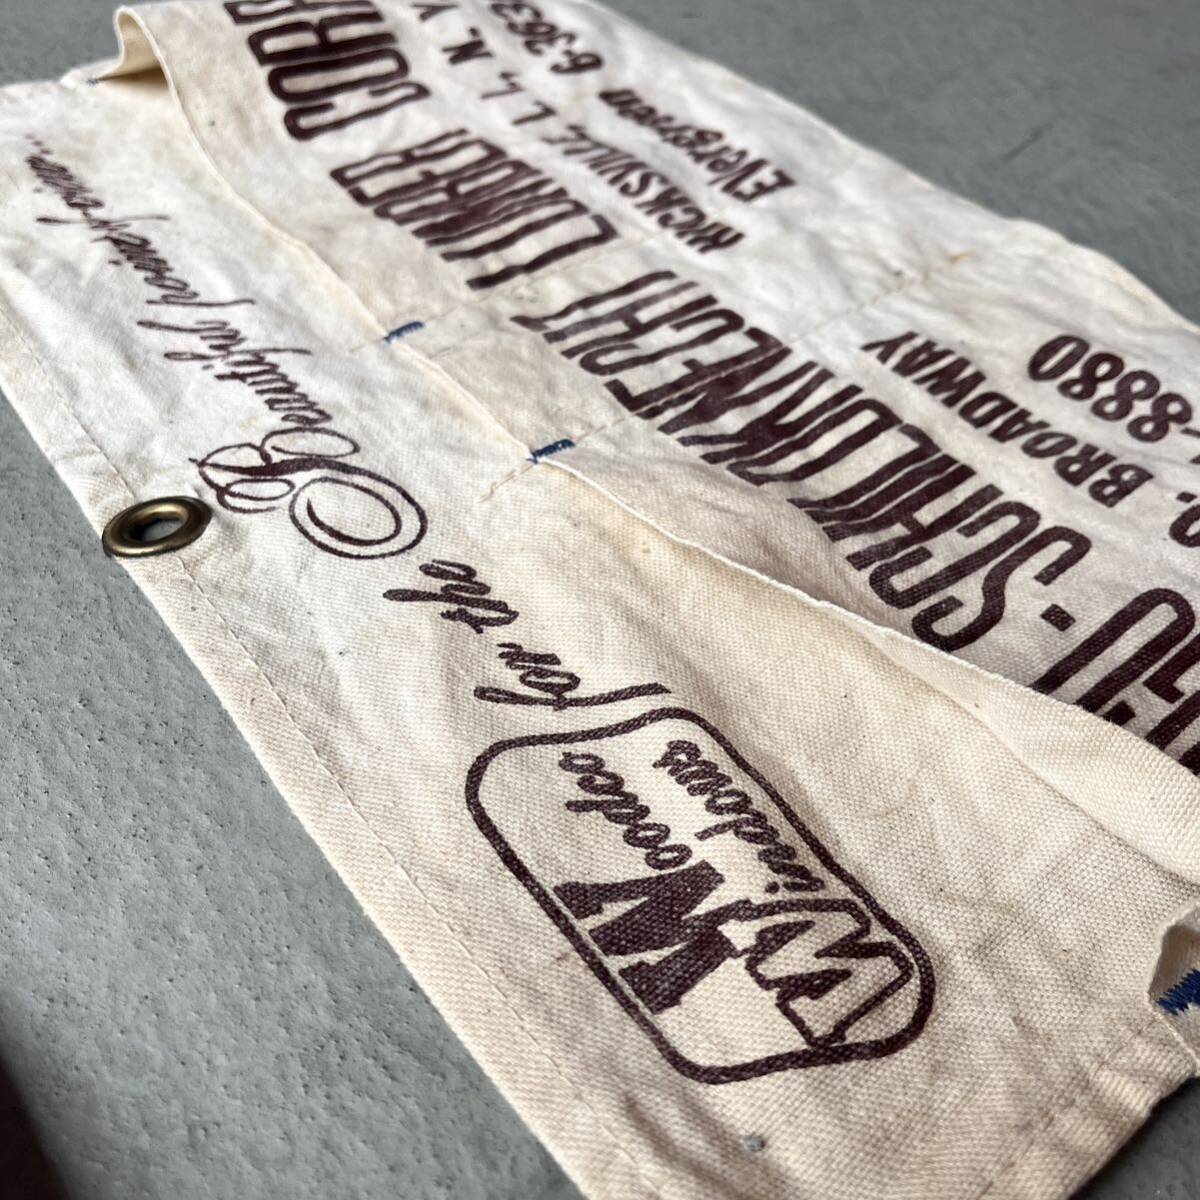  american Vintage 50*s brown group apron Apron interior US miscellaneous goods old clothes LOHAS Cafe gardening camp DIY working clothes apron coffee shop 